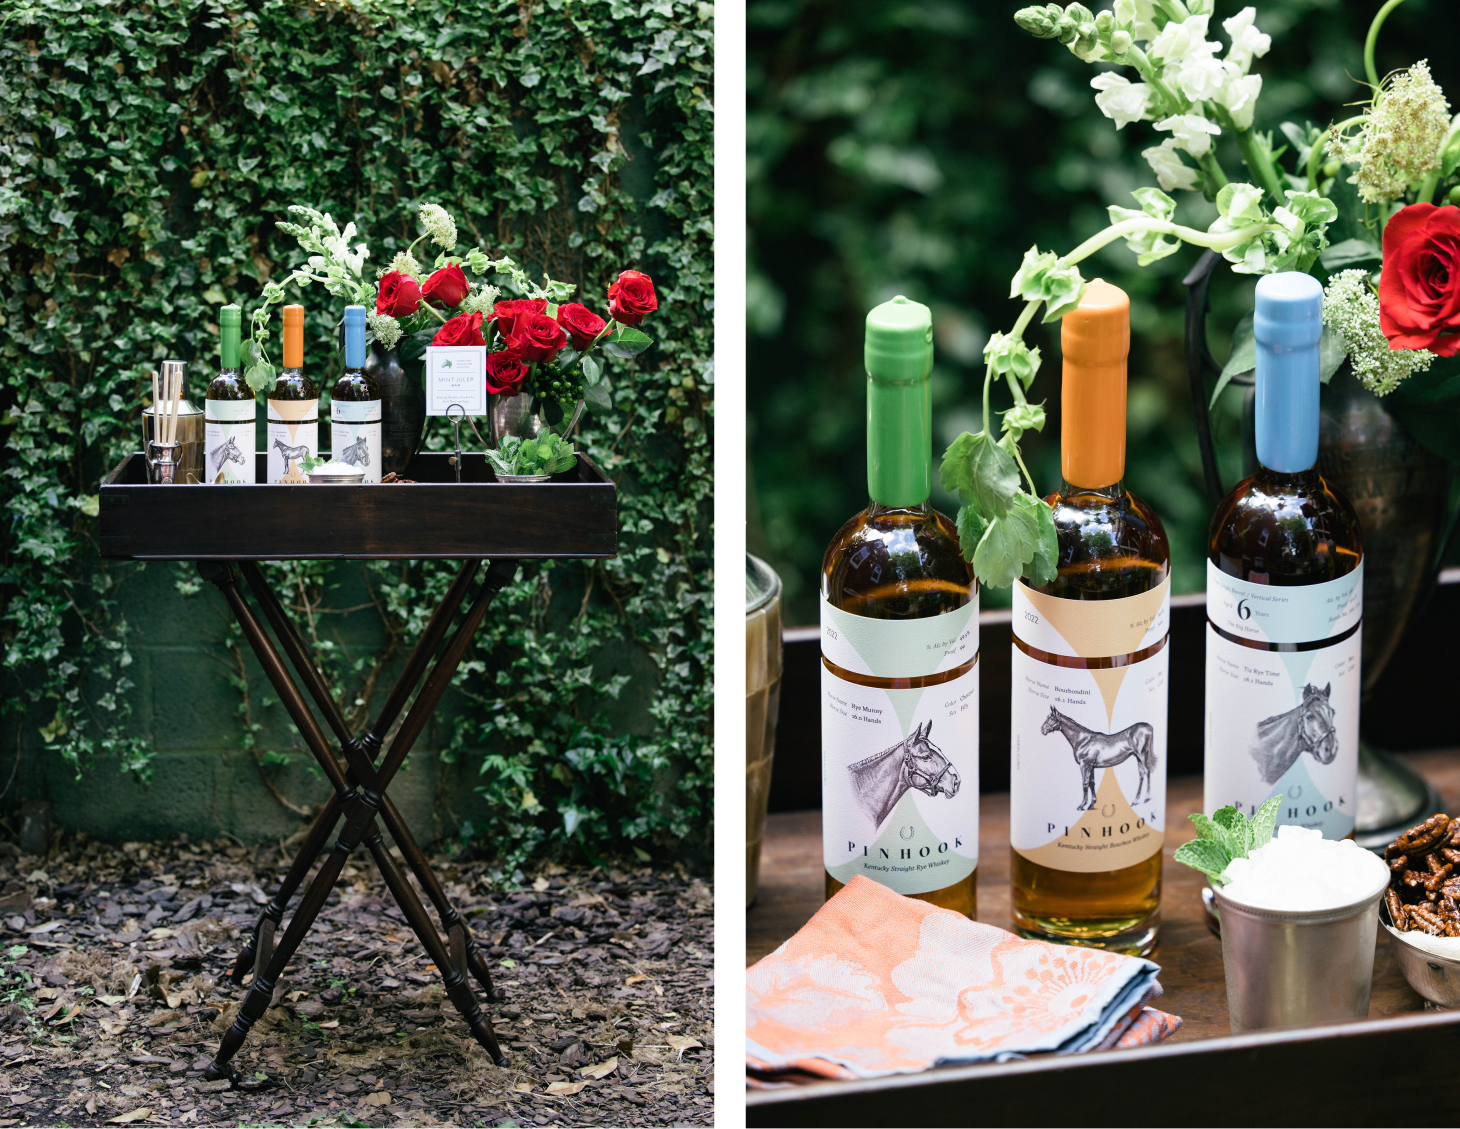 Classic Kentucky Derby Party Ideas with Pinhook Bourbon